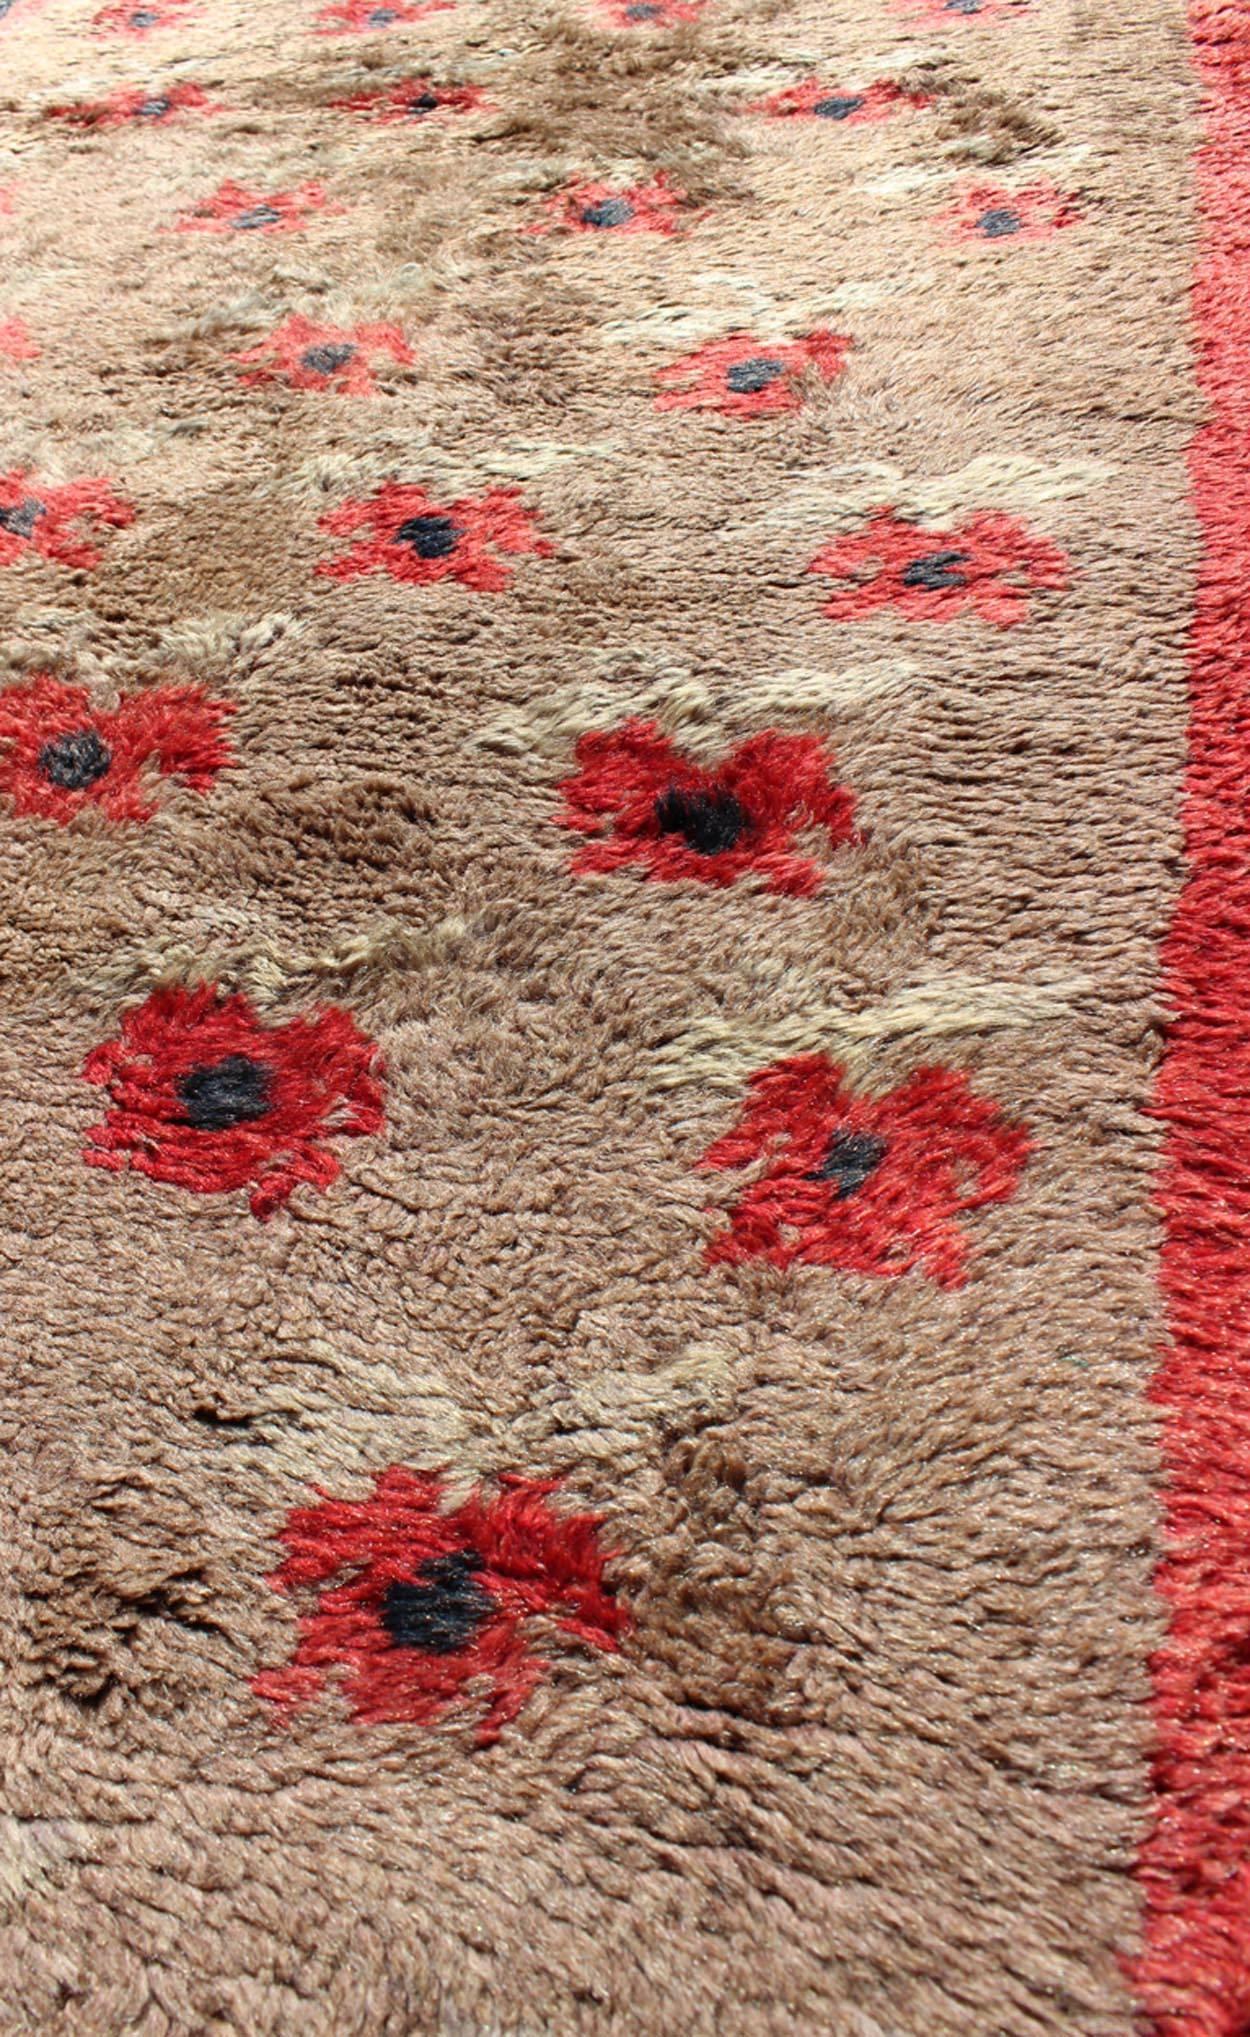 Mid-20th Century Midcentury Turkish Tulu Rug with Floating Flowers Design in Light Camel & Red For Sale